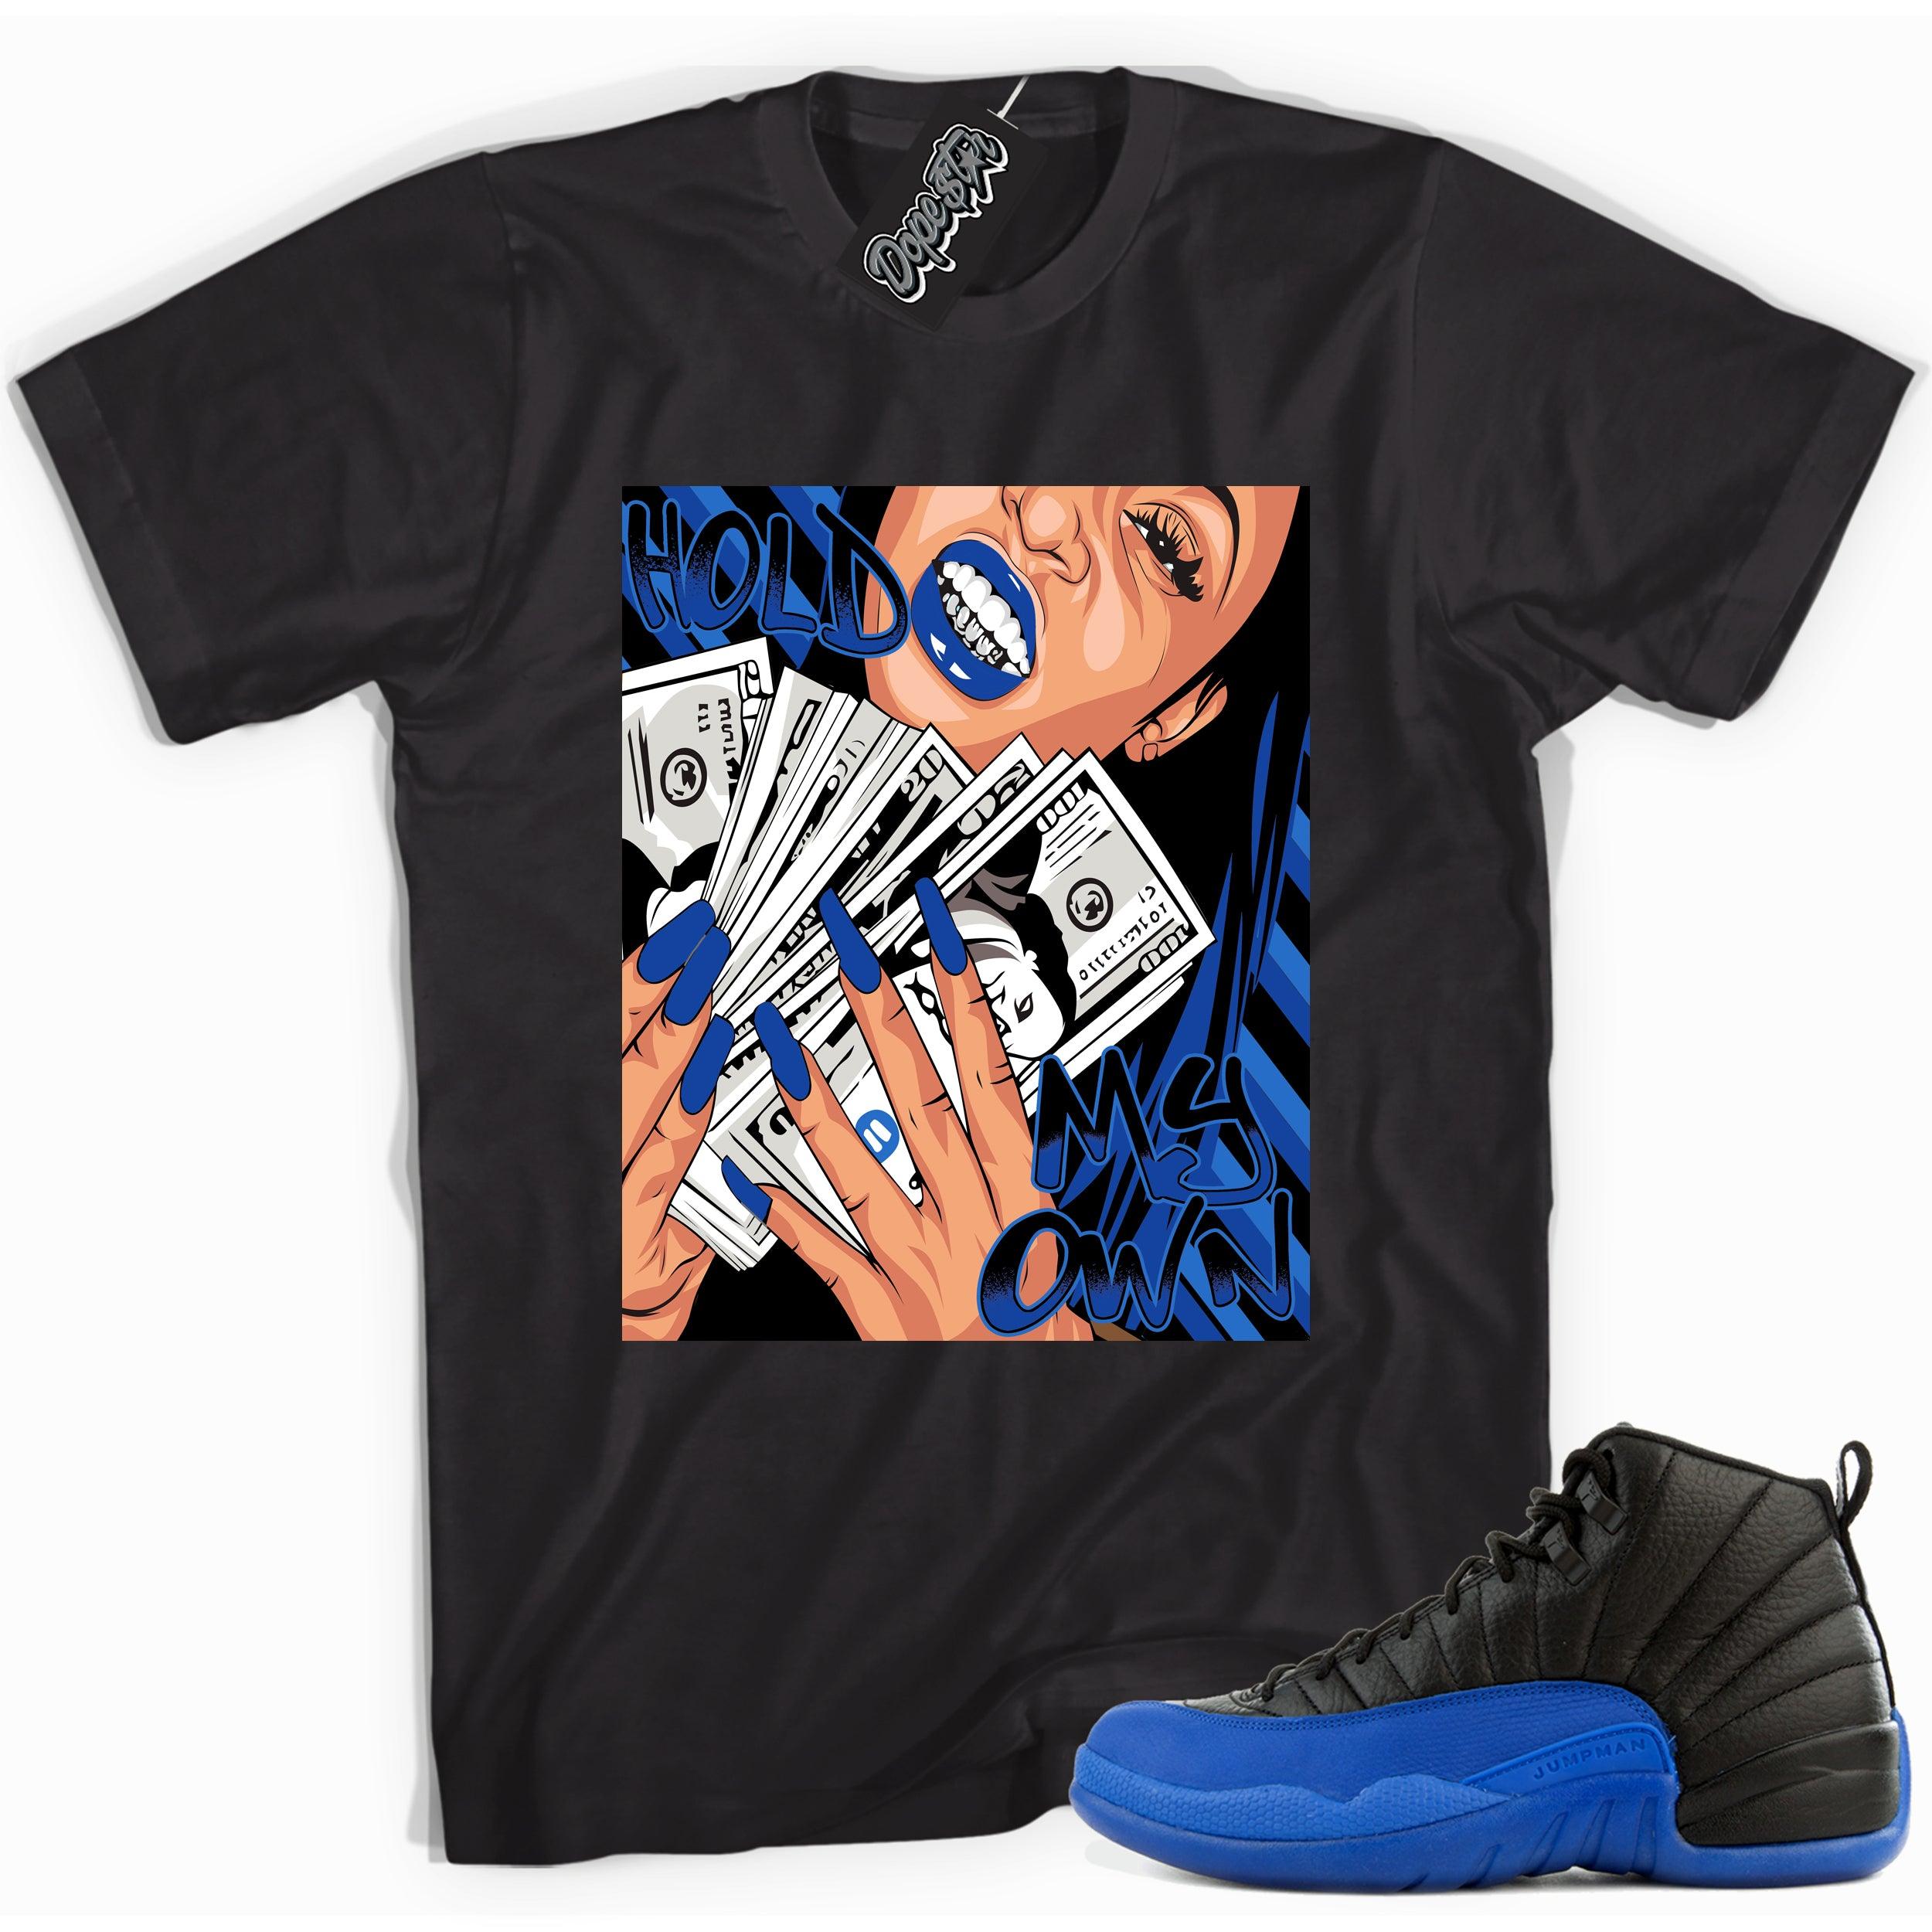 Cool black graphic tee with 'hold my own' print, that perfectly matches  Air Jordan 12 Retro Black Game Royal sneakers.